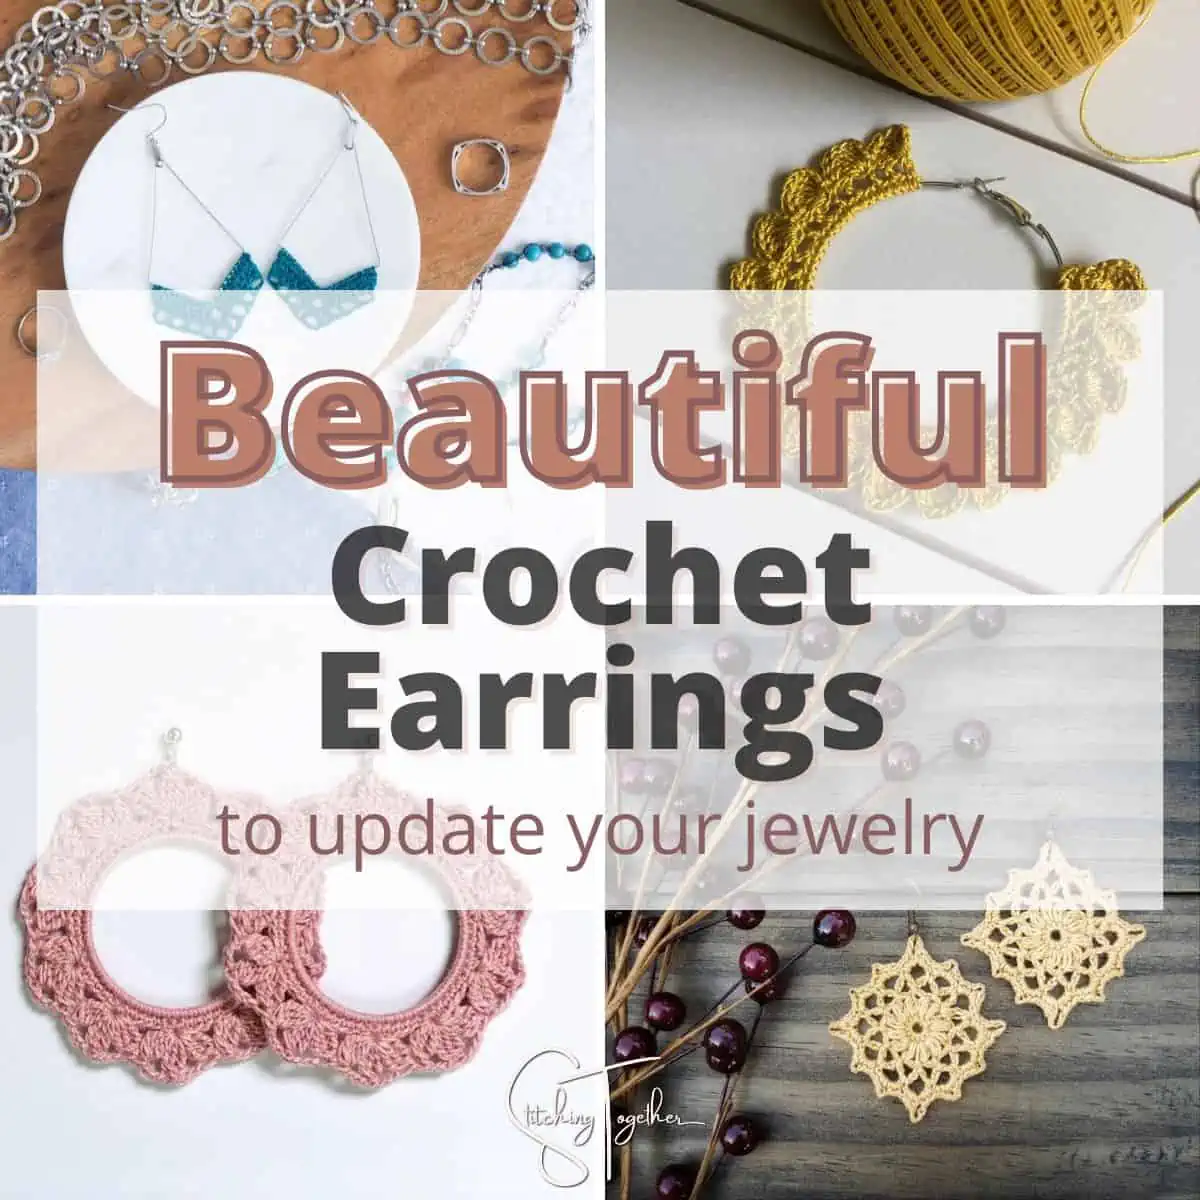 collage image of different crochet earrings with text overlay reading "beautiful crochet earrings to update your jewelry"